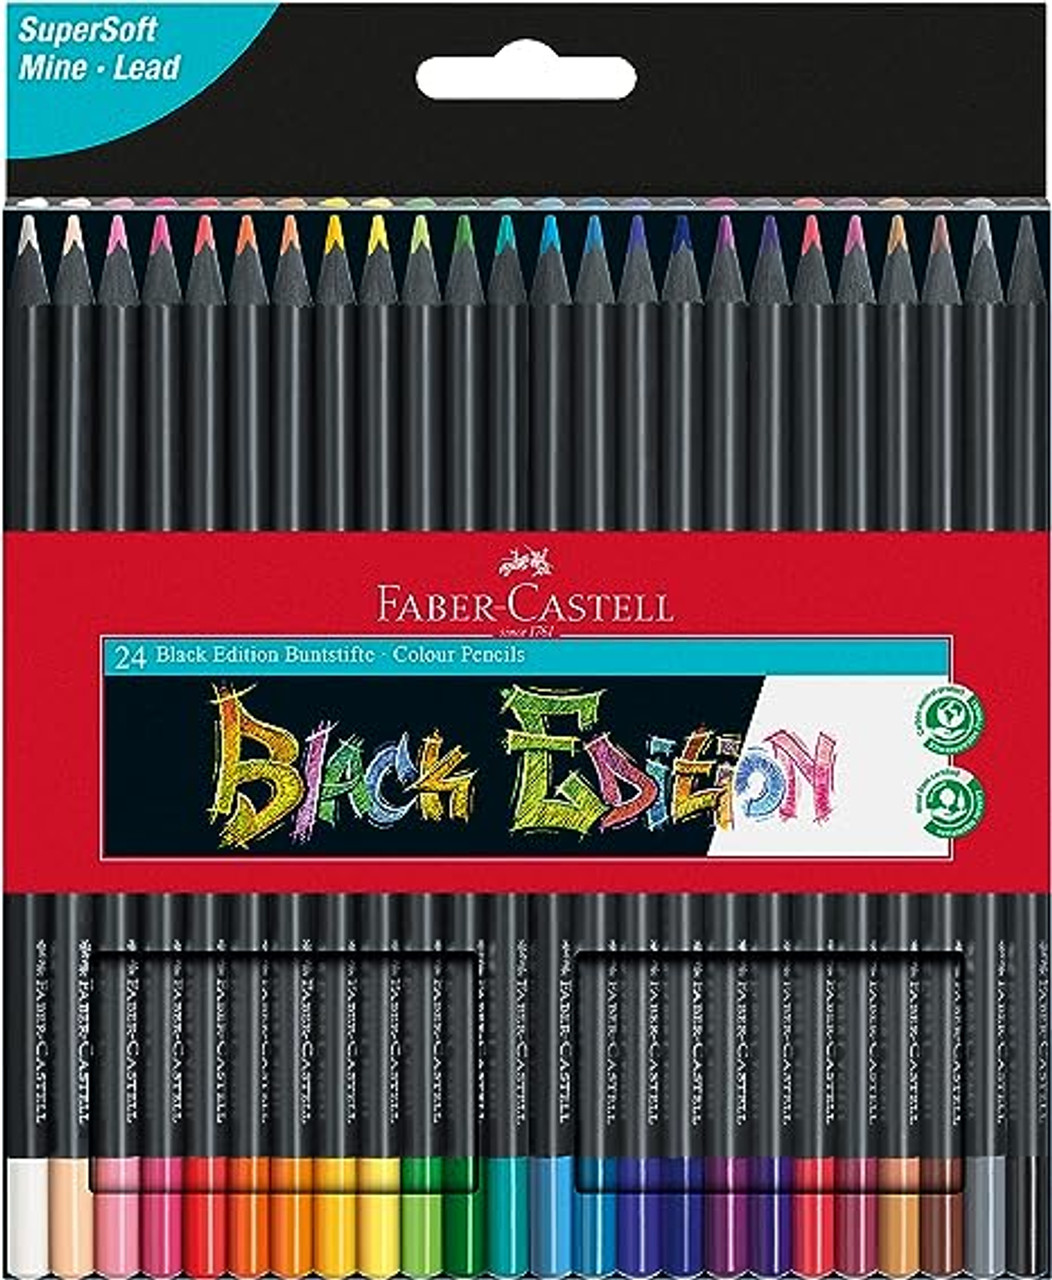 Faber-Castell Black Edition Colored Pencils - 50 Count, Black Wood and  Super Soft Core Lead, Art Colored Pencils for Adult Coloring, Teens, Kids  and